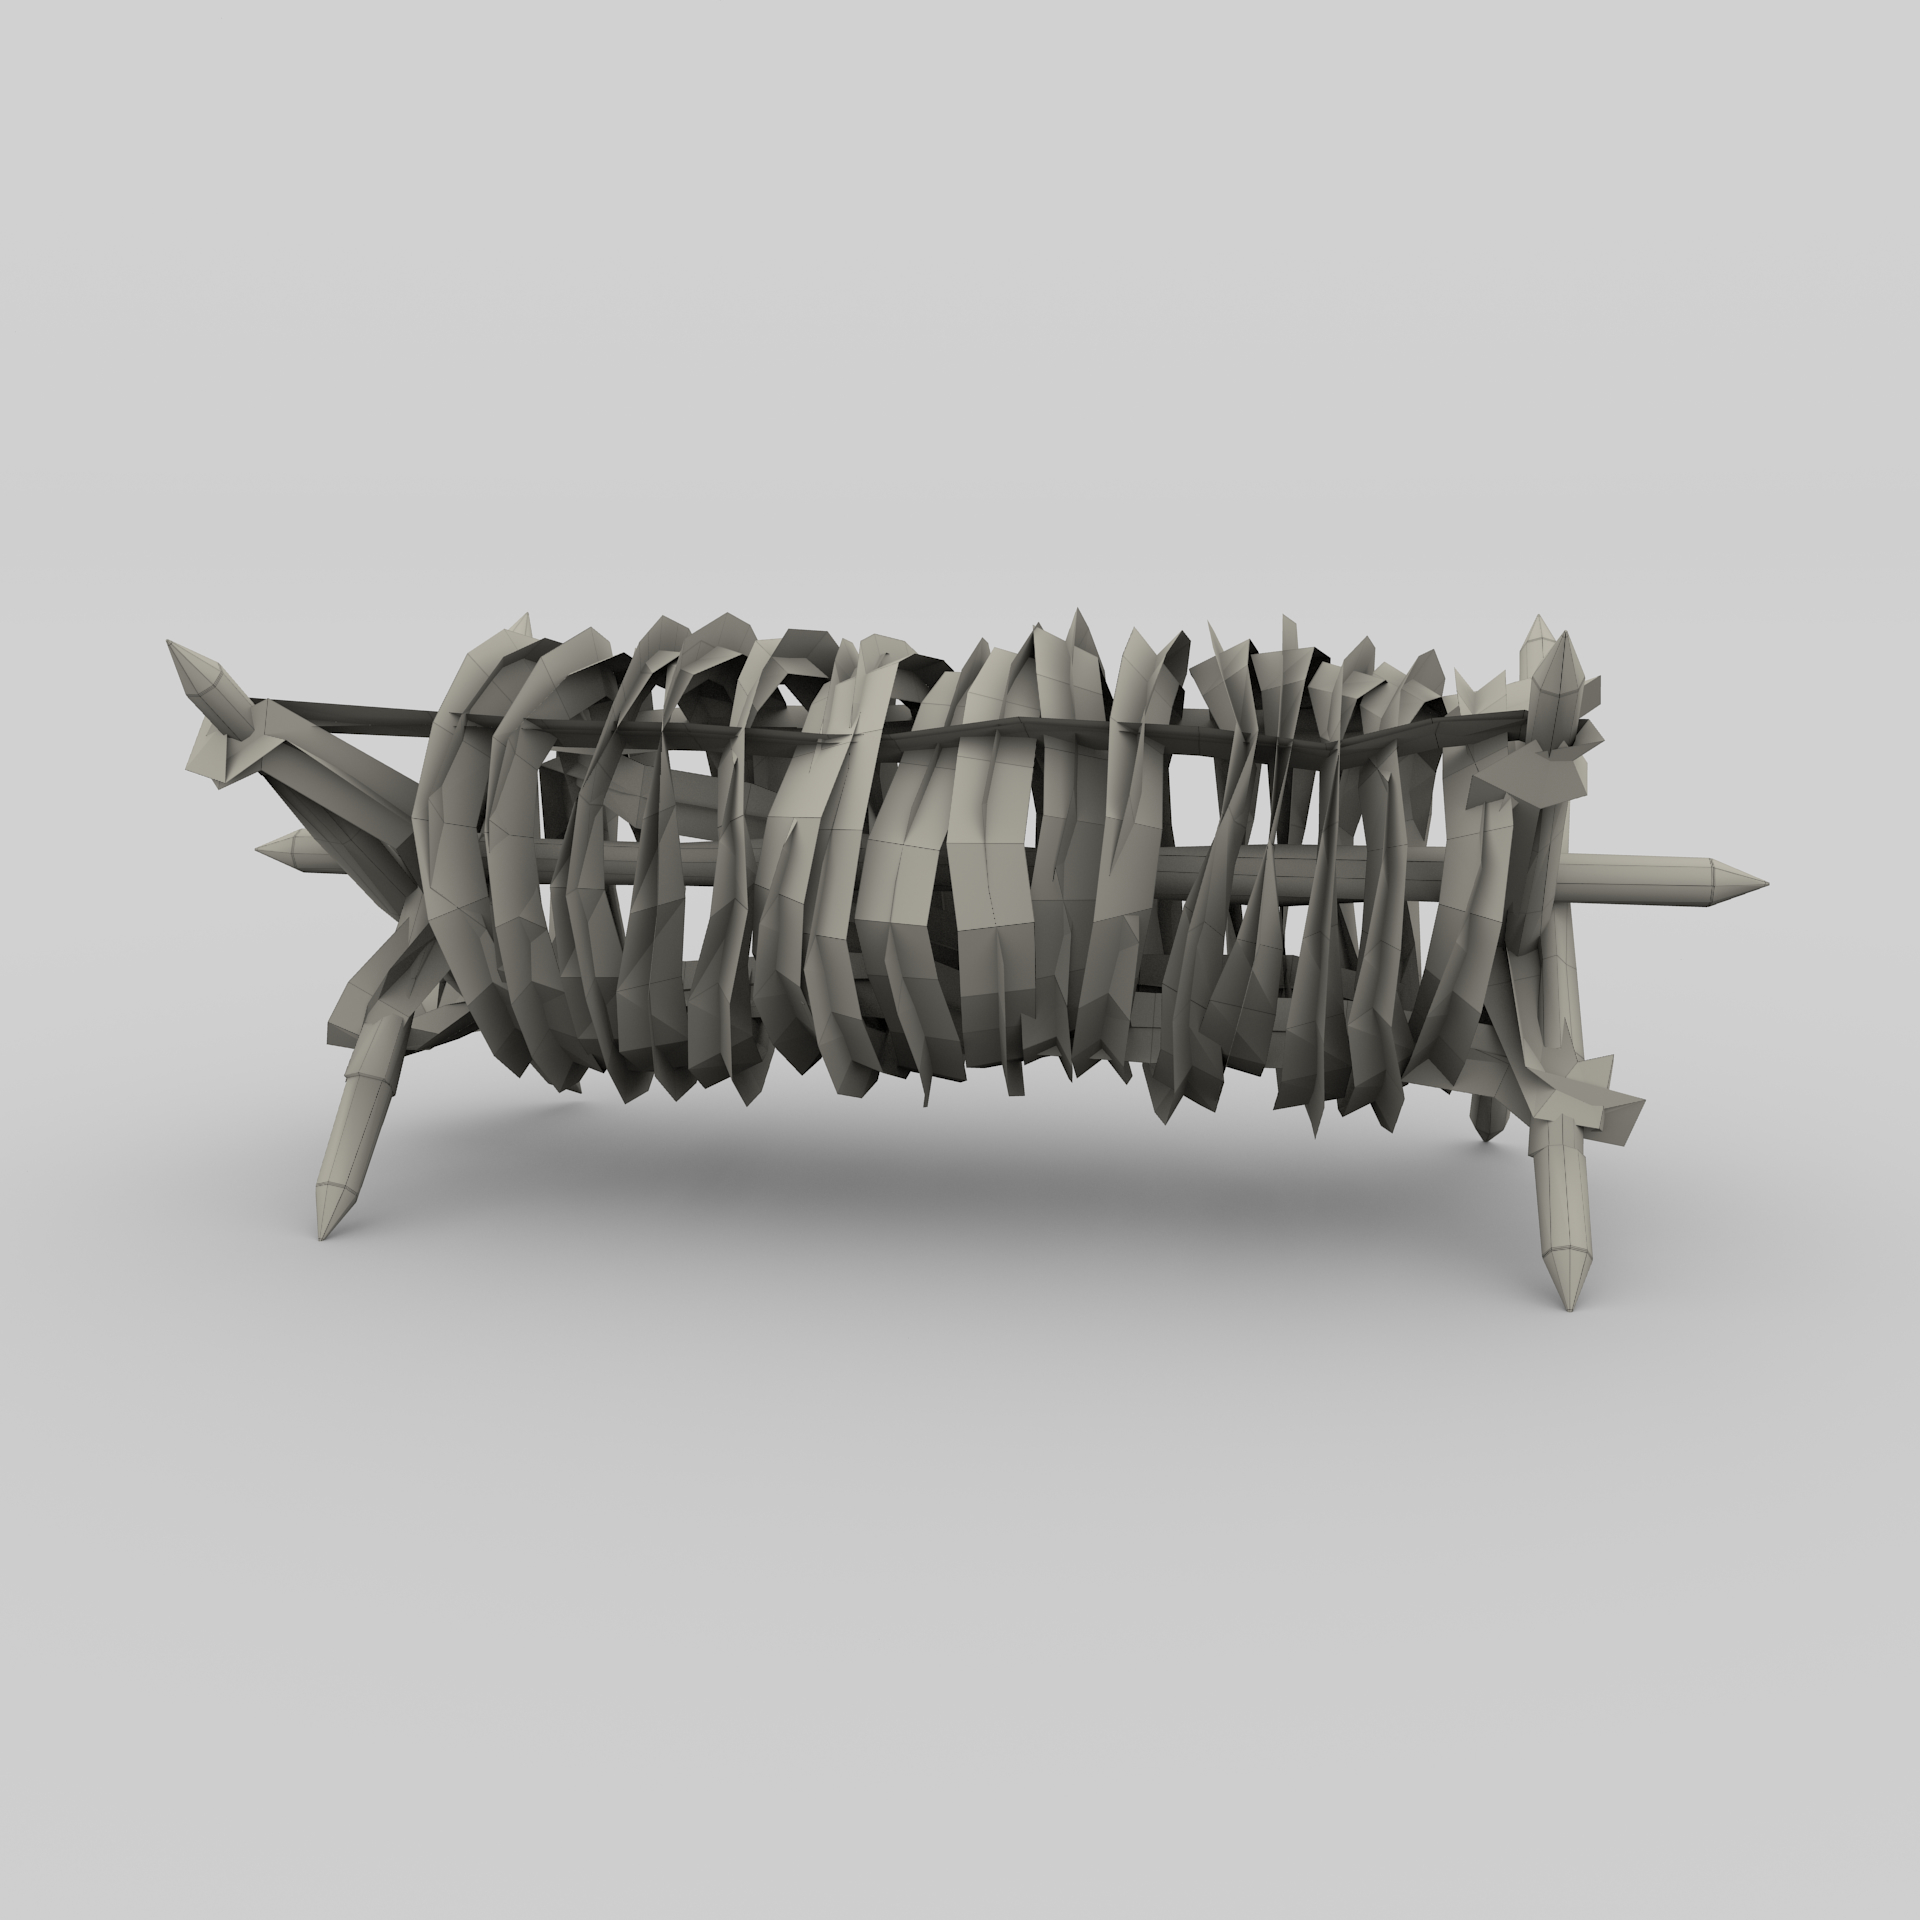 Barbed wire obstacle 3D model TurboSquid 1191730